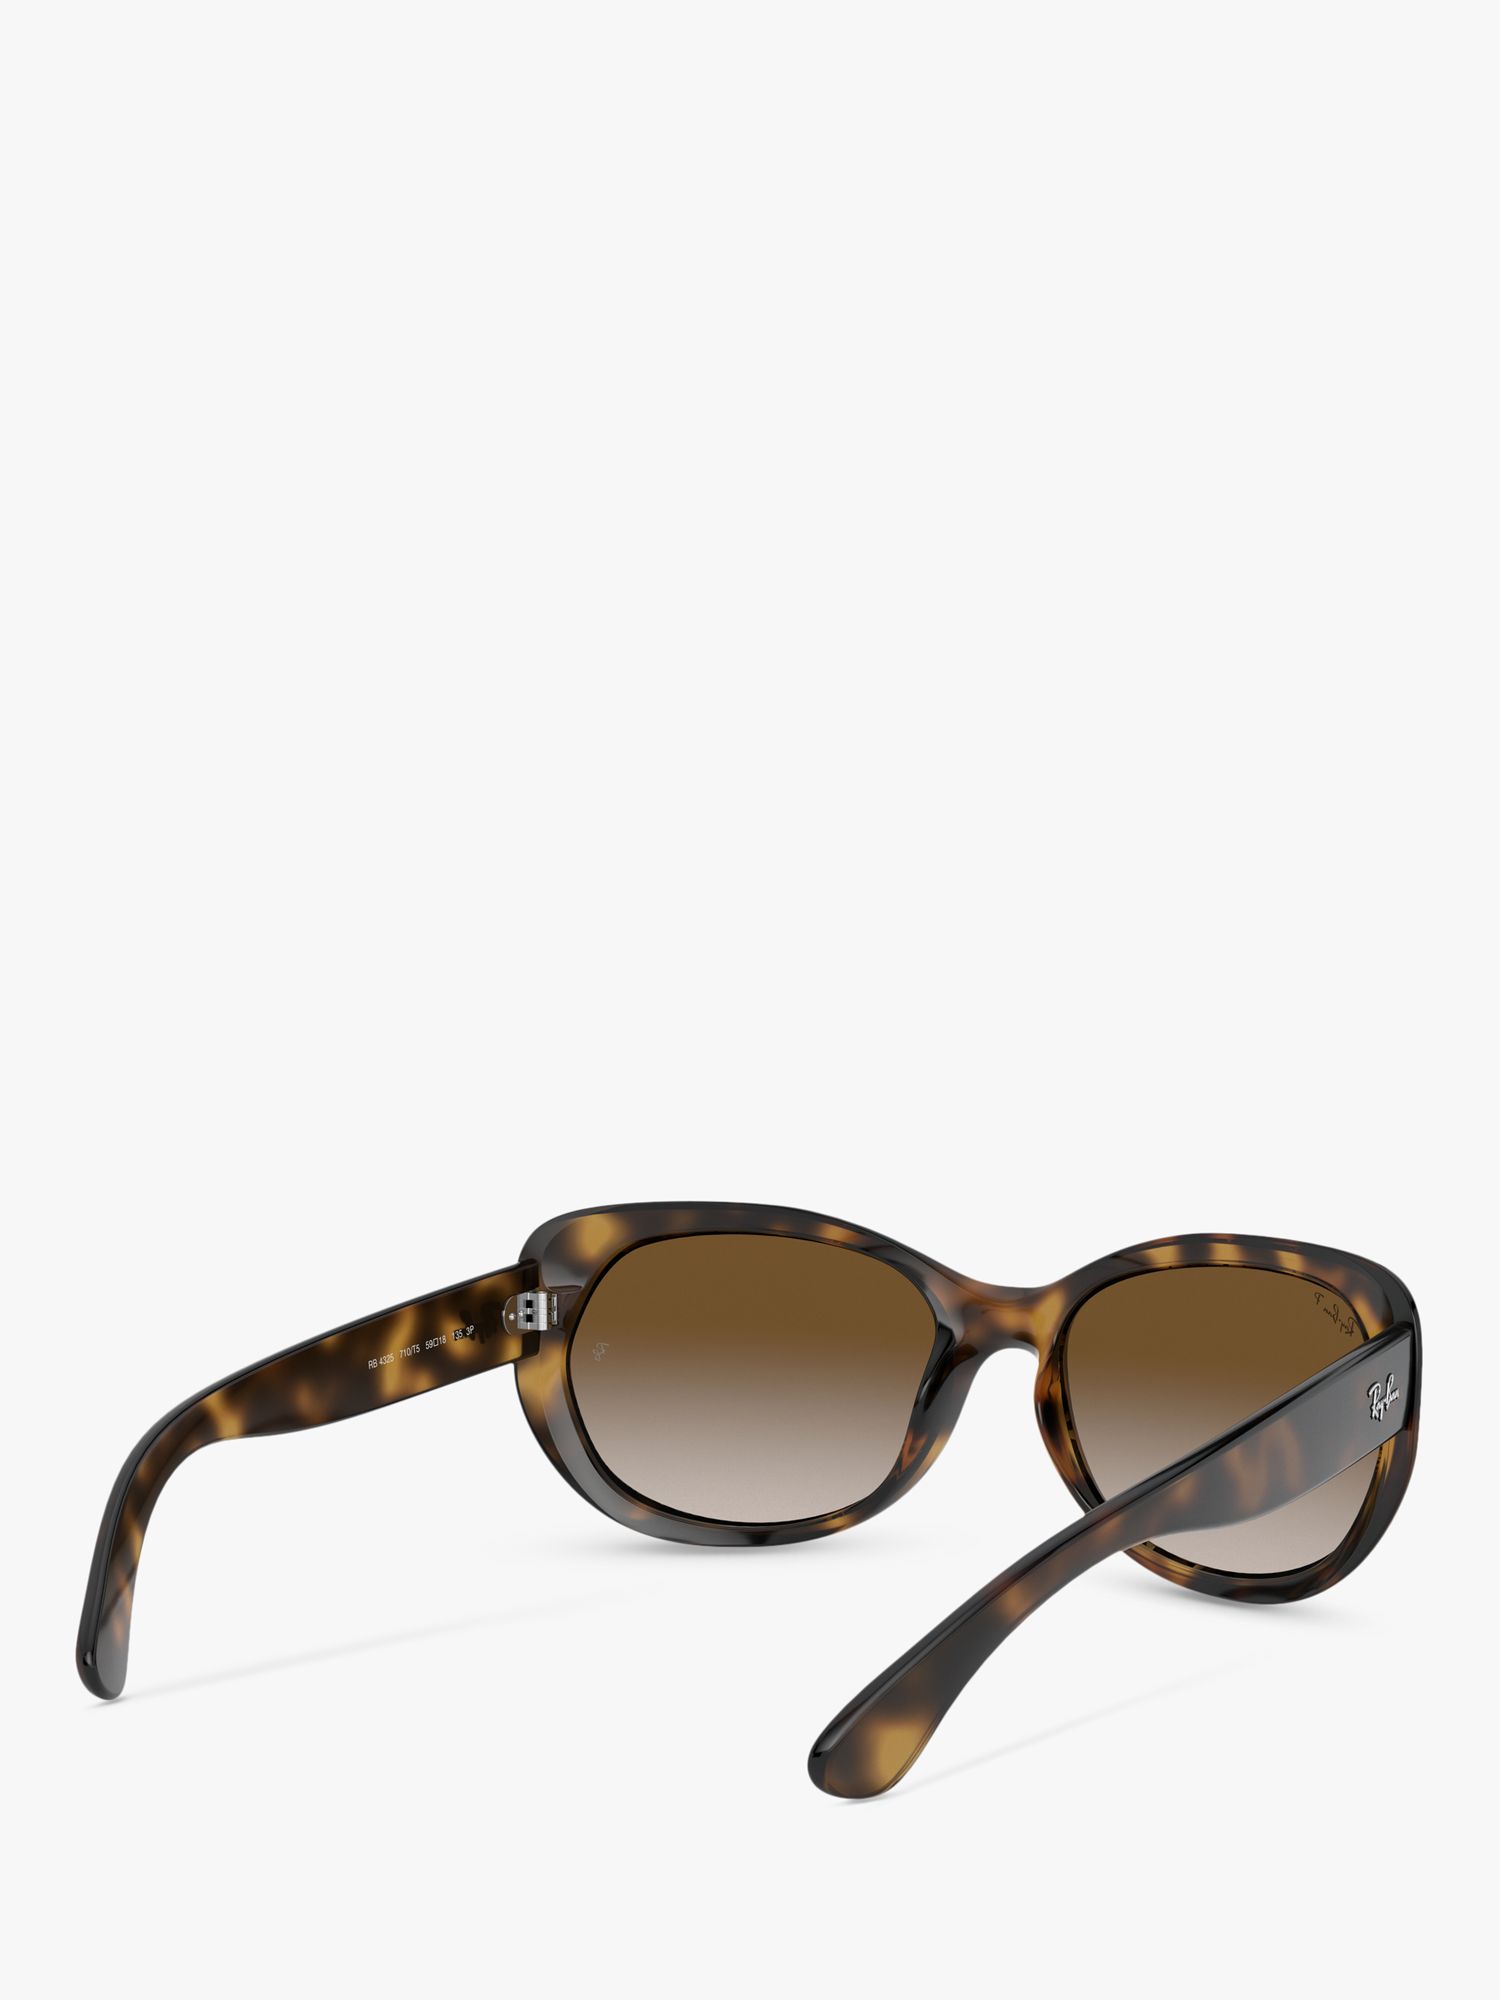 Ray-Ban RB4325 Women's Polarised Butterfly Sunglasses, Tortoise